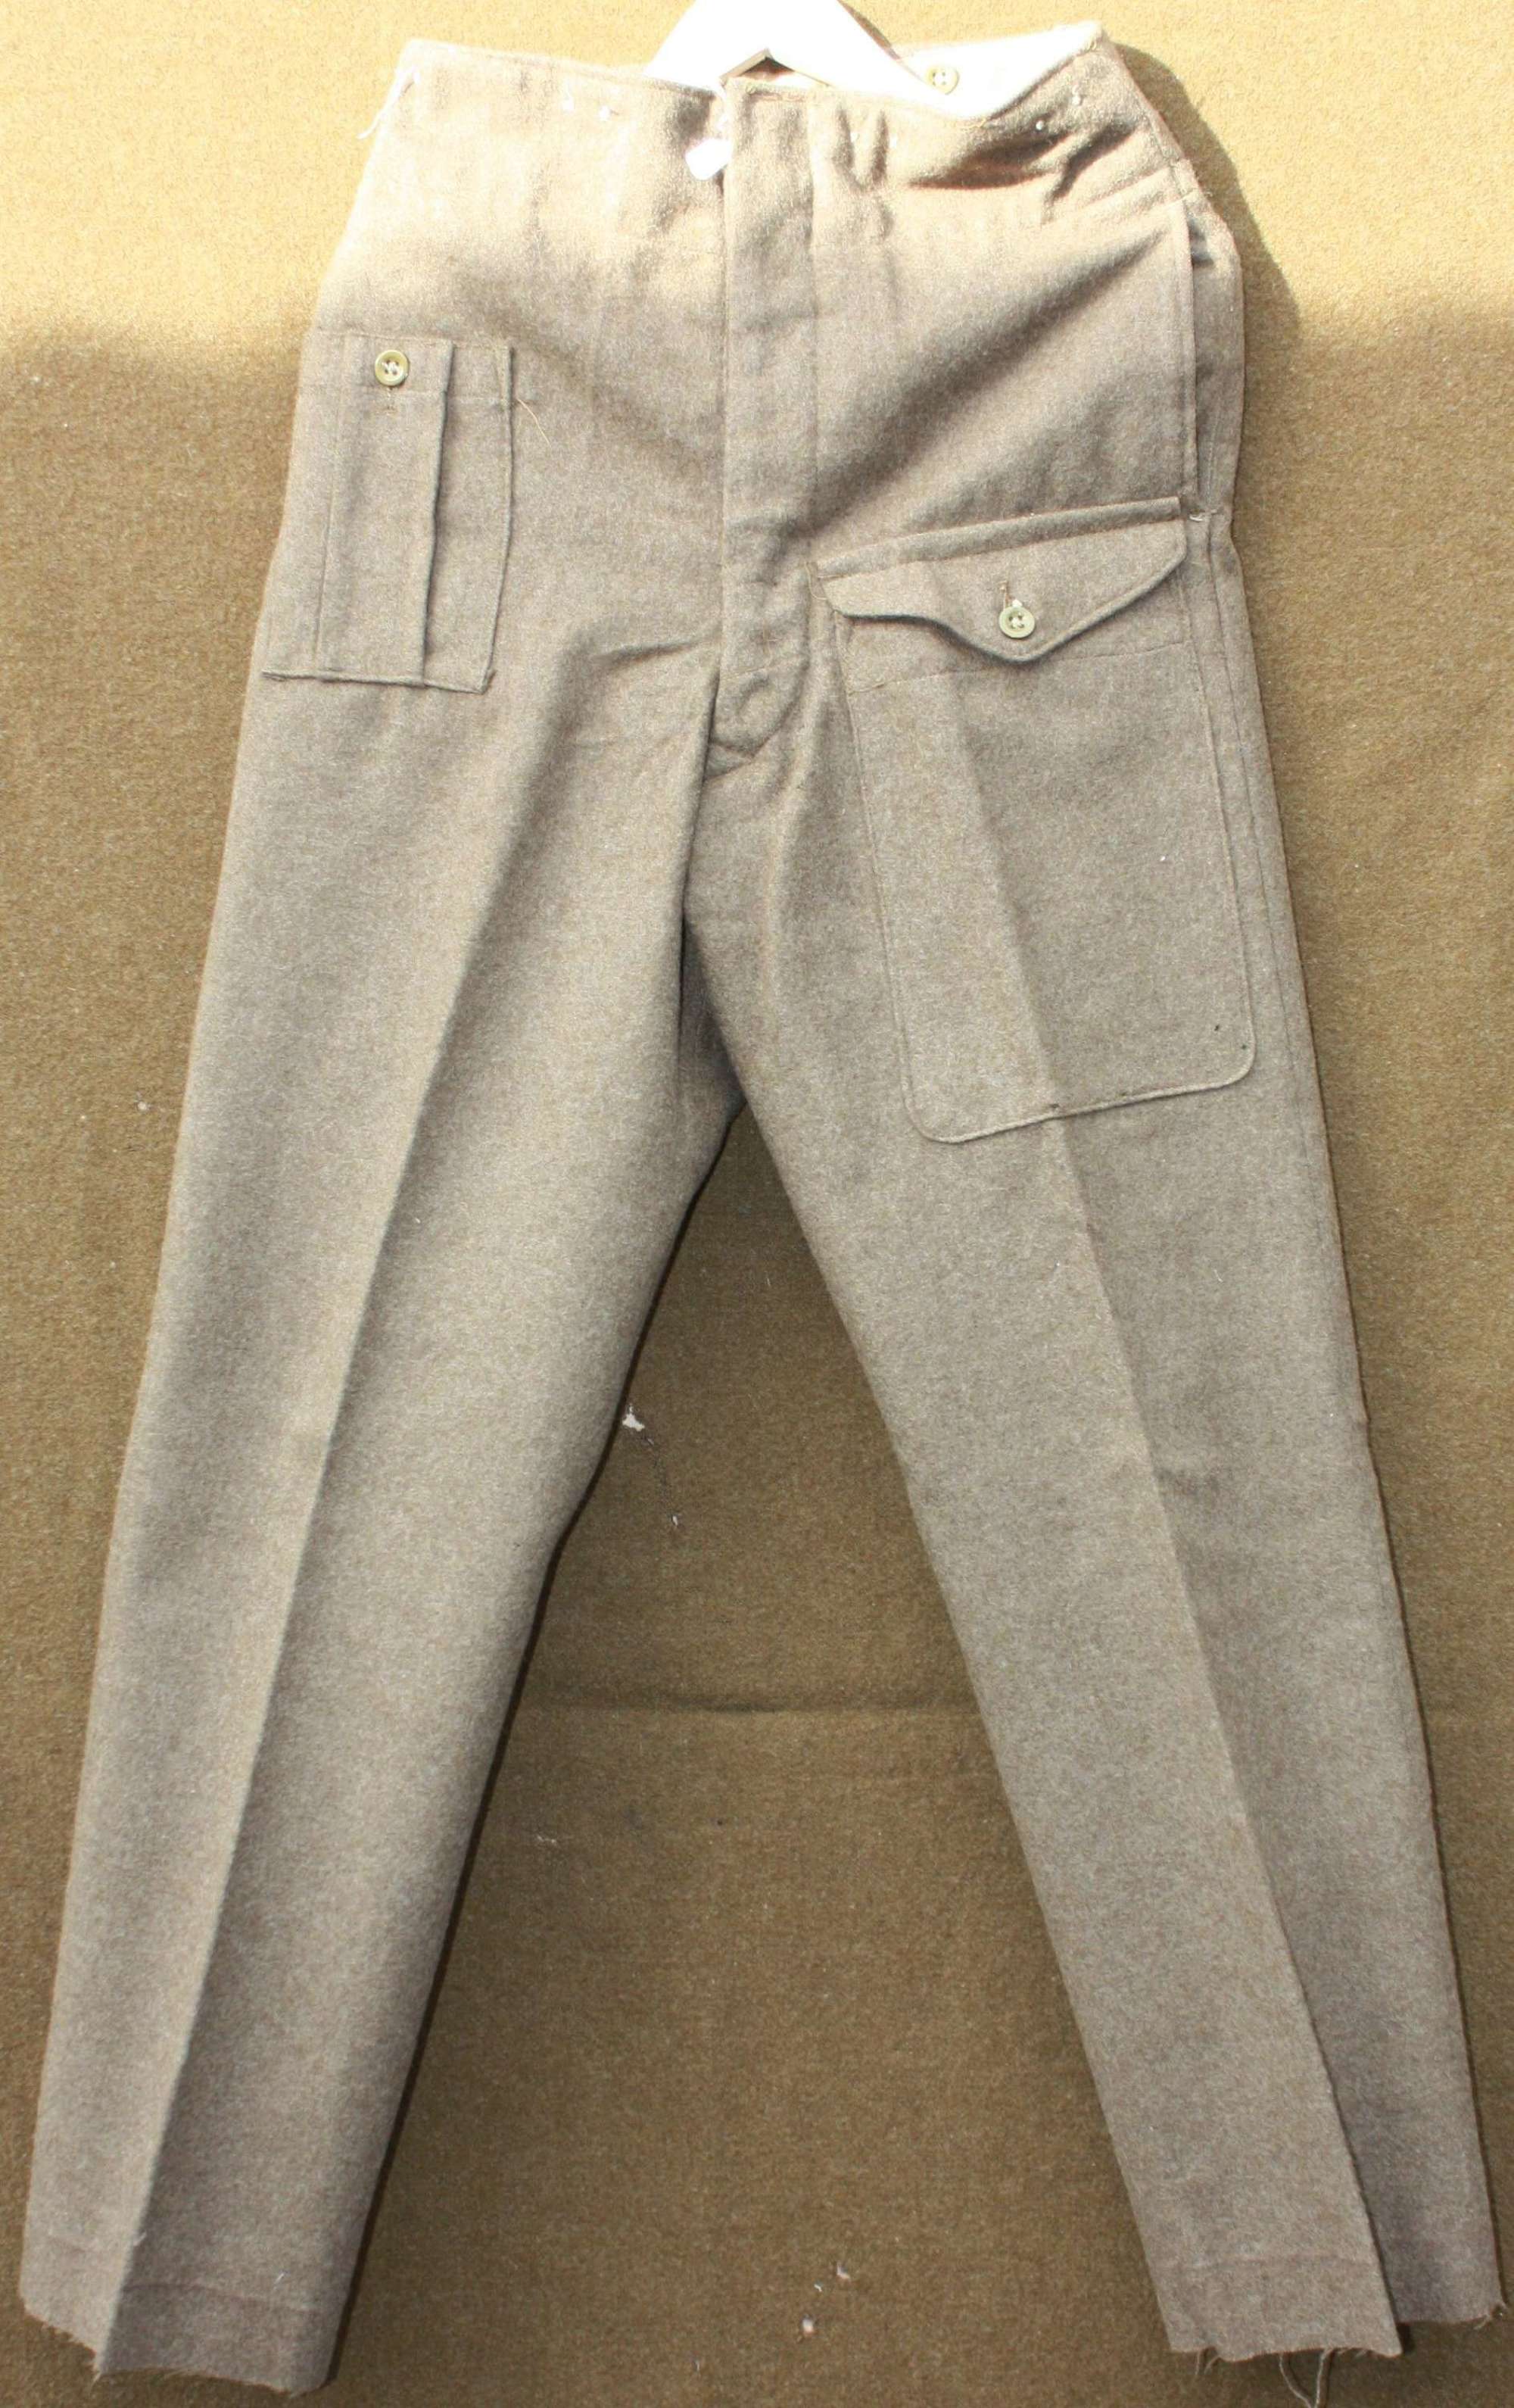 A FAIRLY GOOD PAIR OF 46 PATTERN BATTLE DRESS TROUSERS